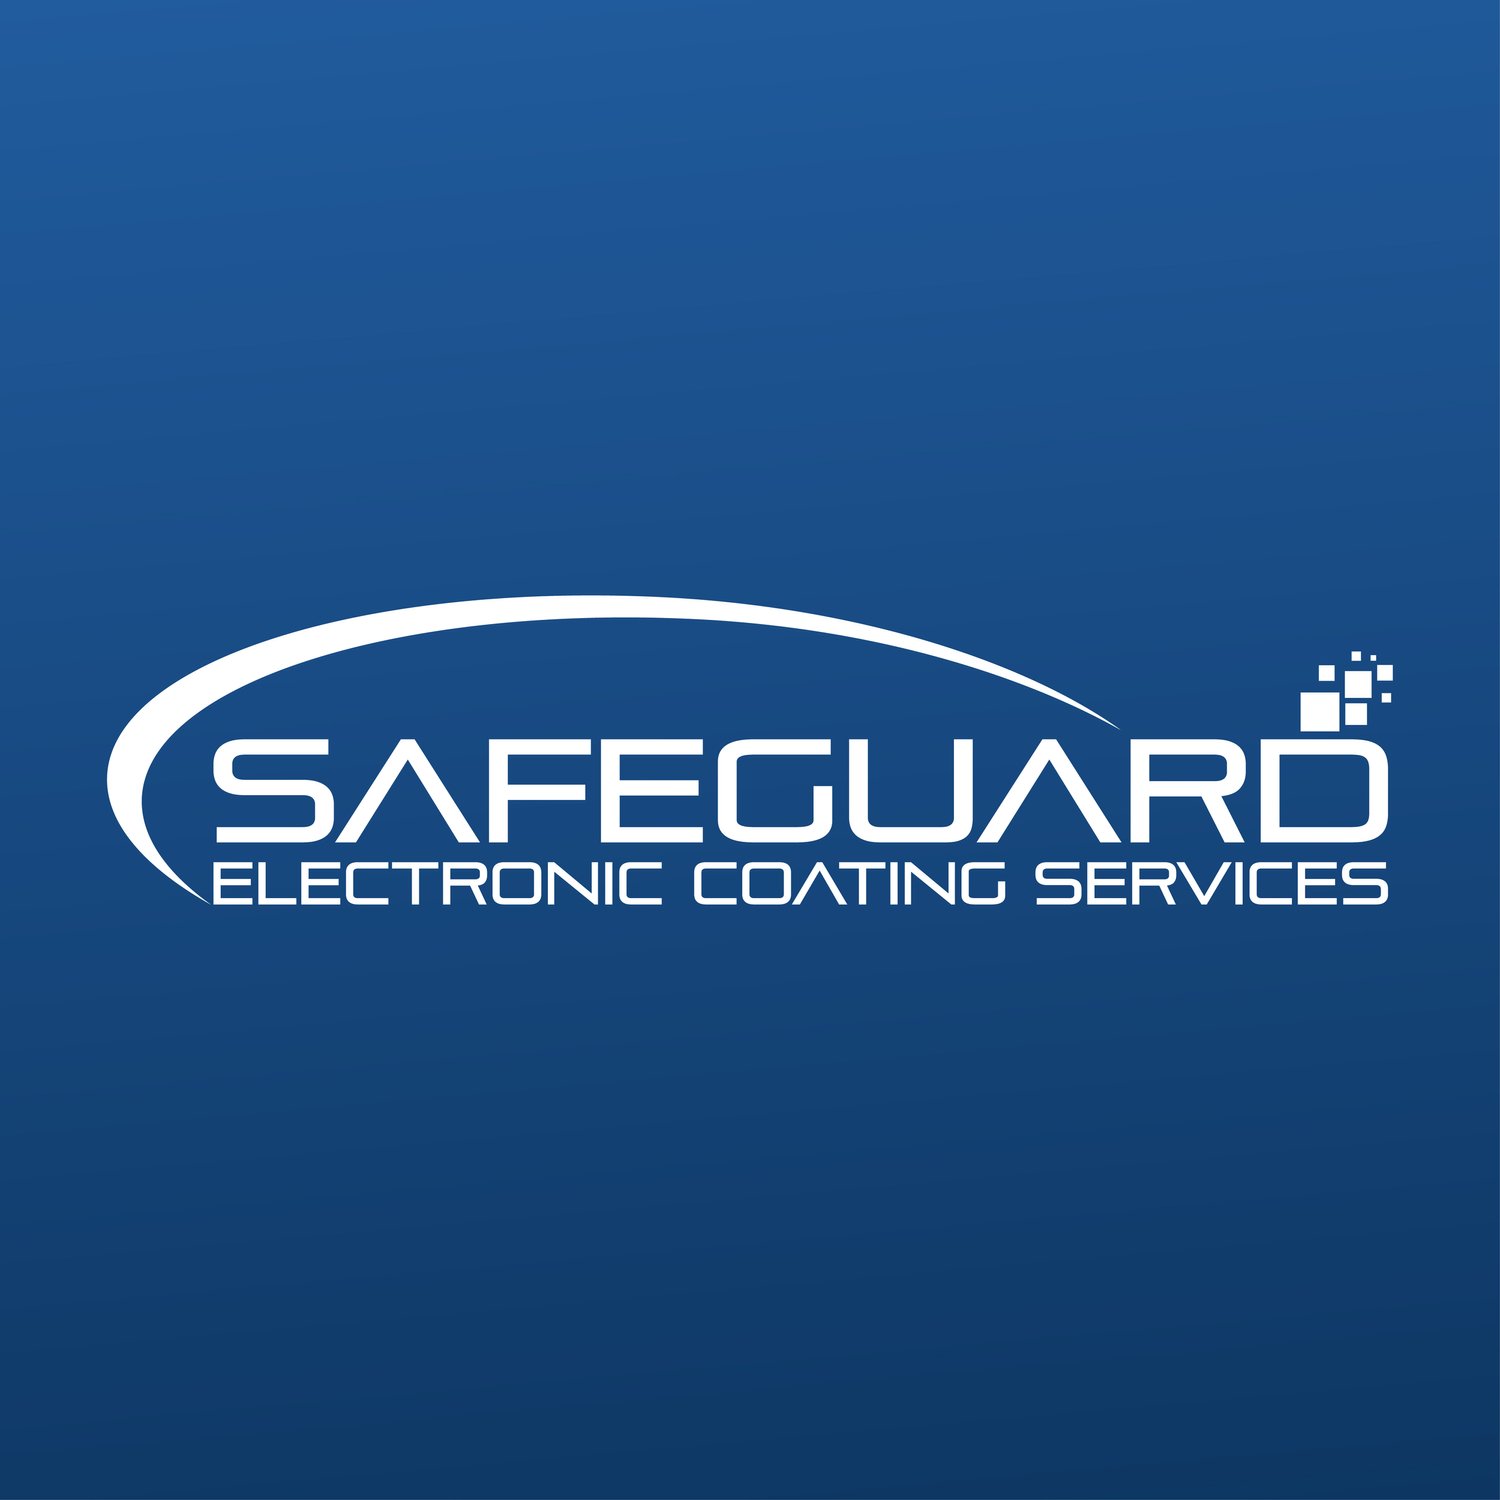 Safeguard Electronic Coating Services